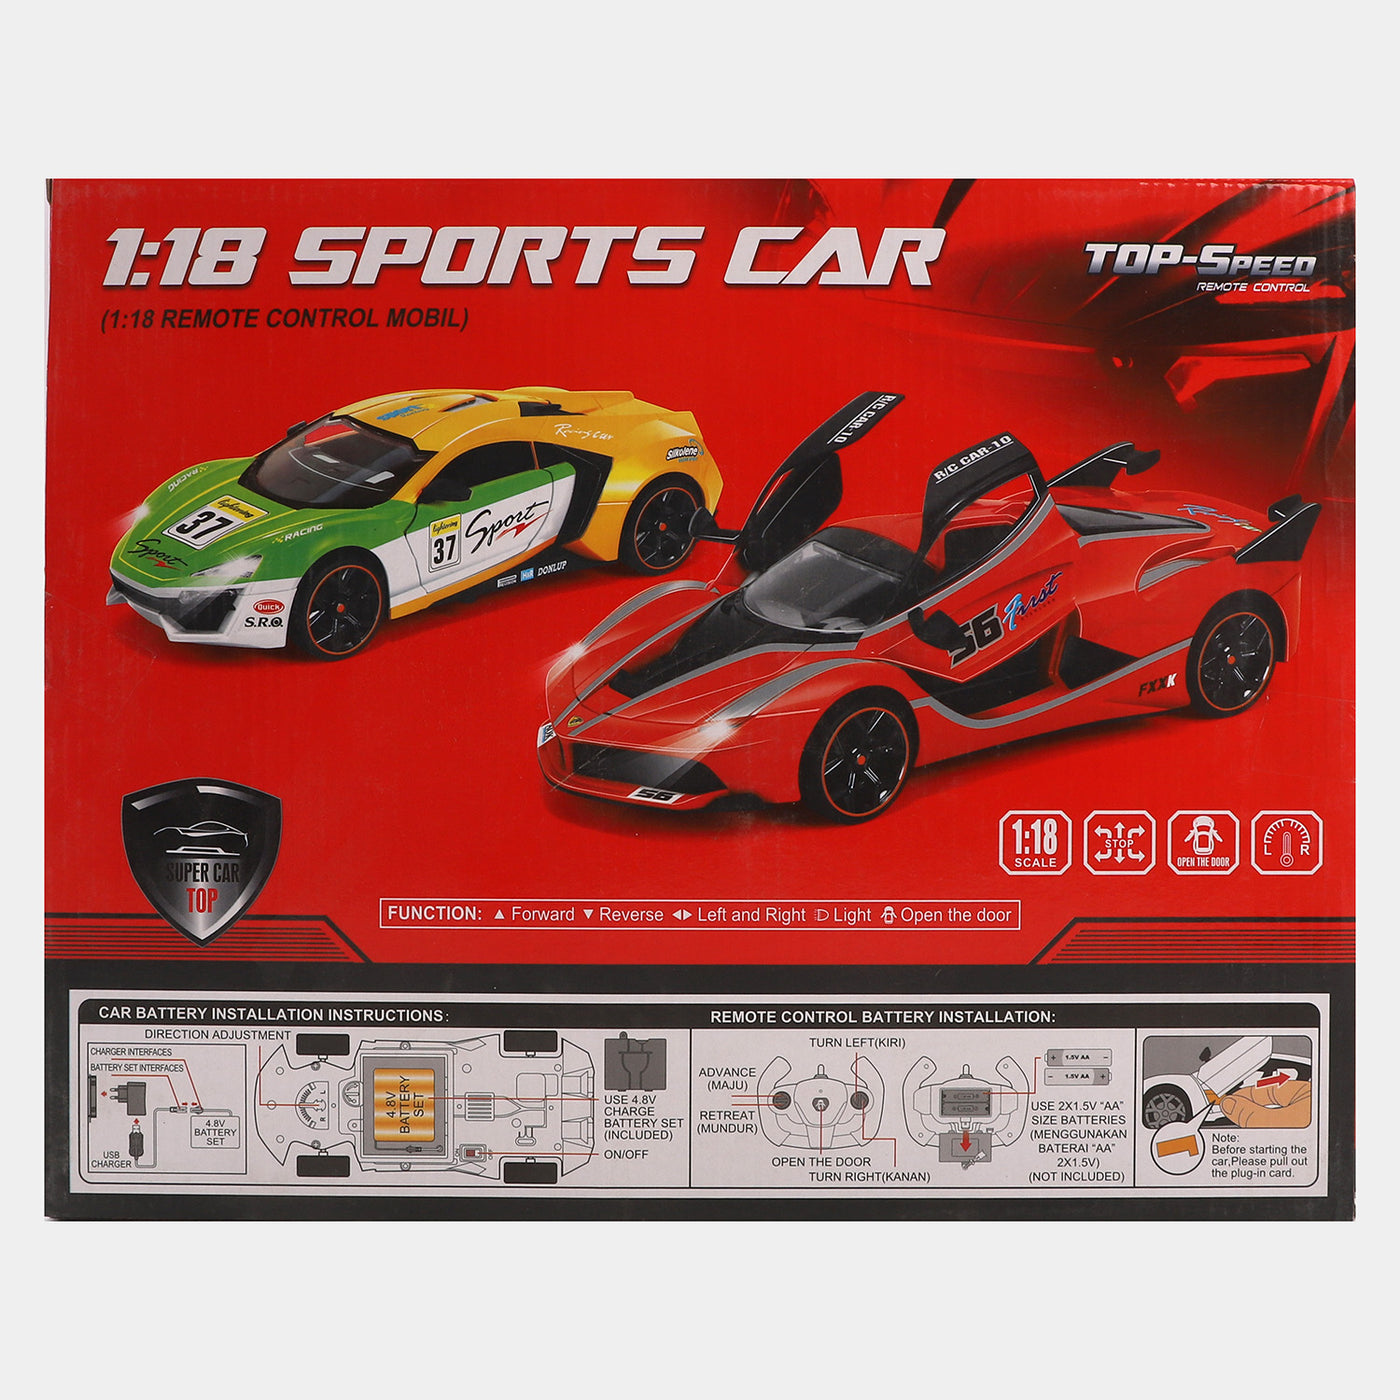 Top Speed Car R/C Toy For kids